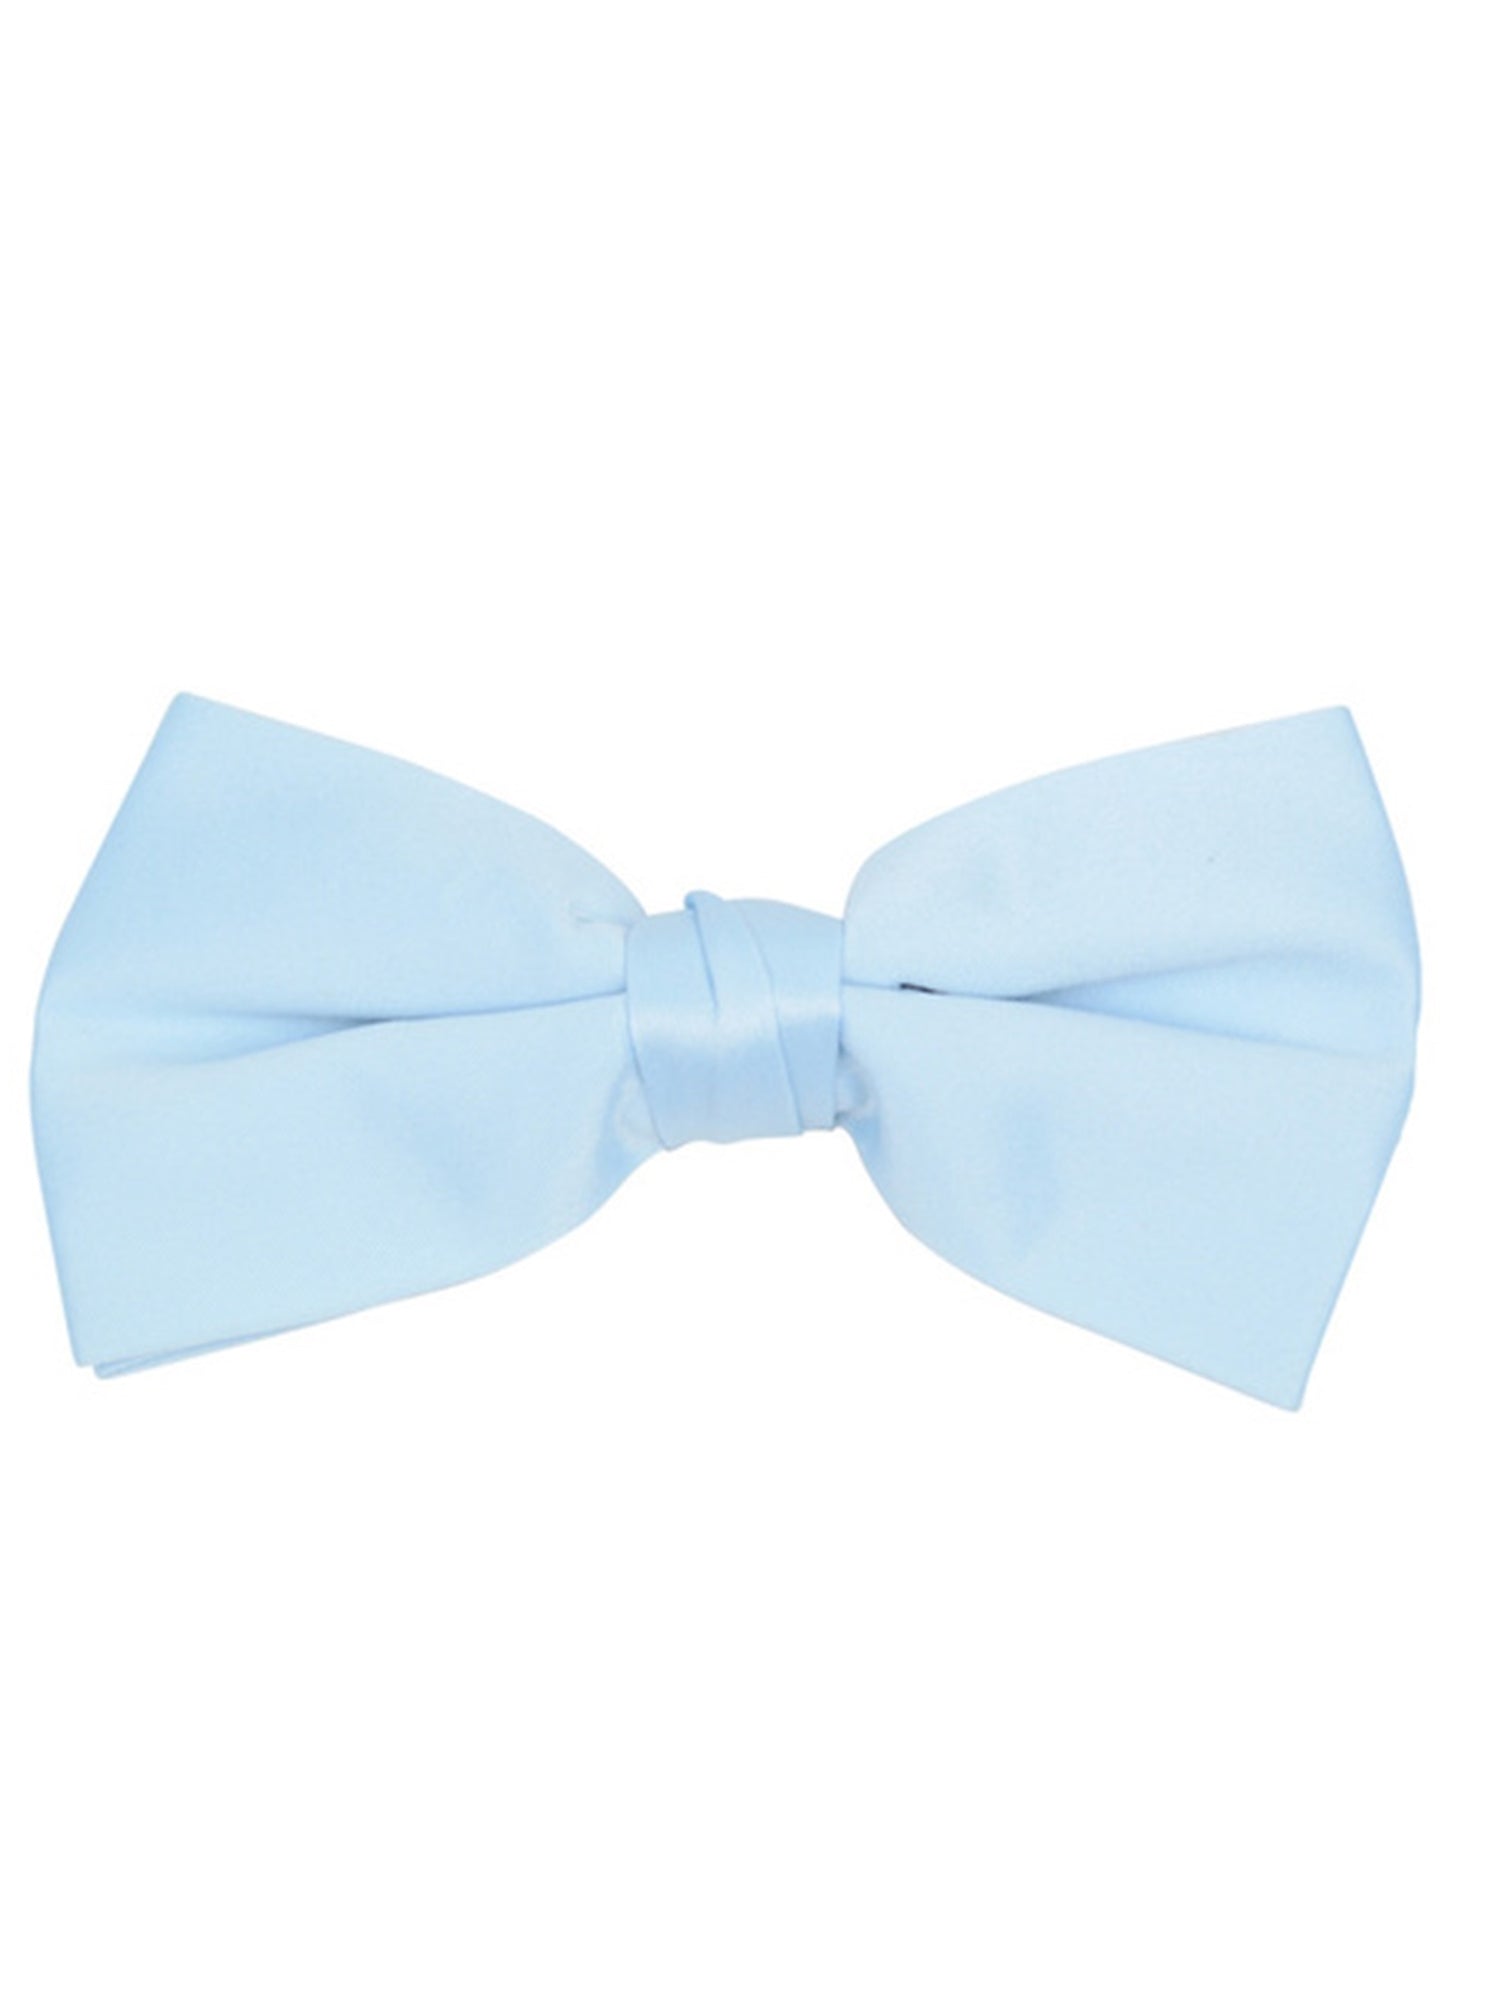 Men's Pre-tied Clip On Bow Tie - Formal Tuxedo Solid Color Men's Solid Color Bow Tie TheDapperTie Baby Blue One Size 